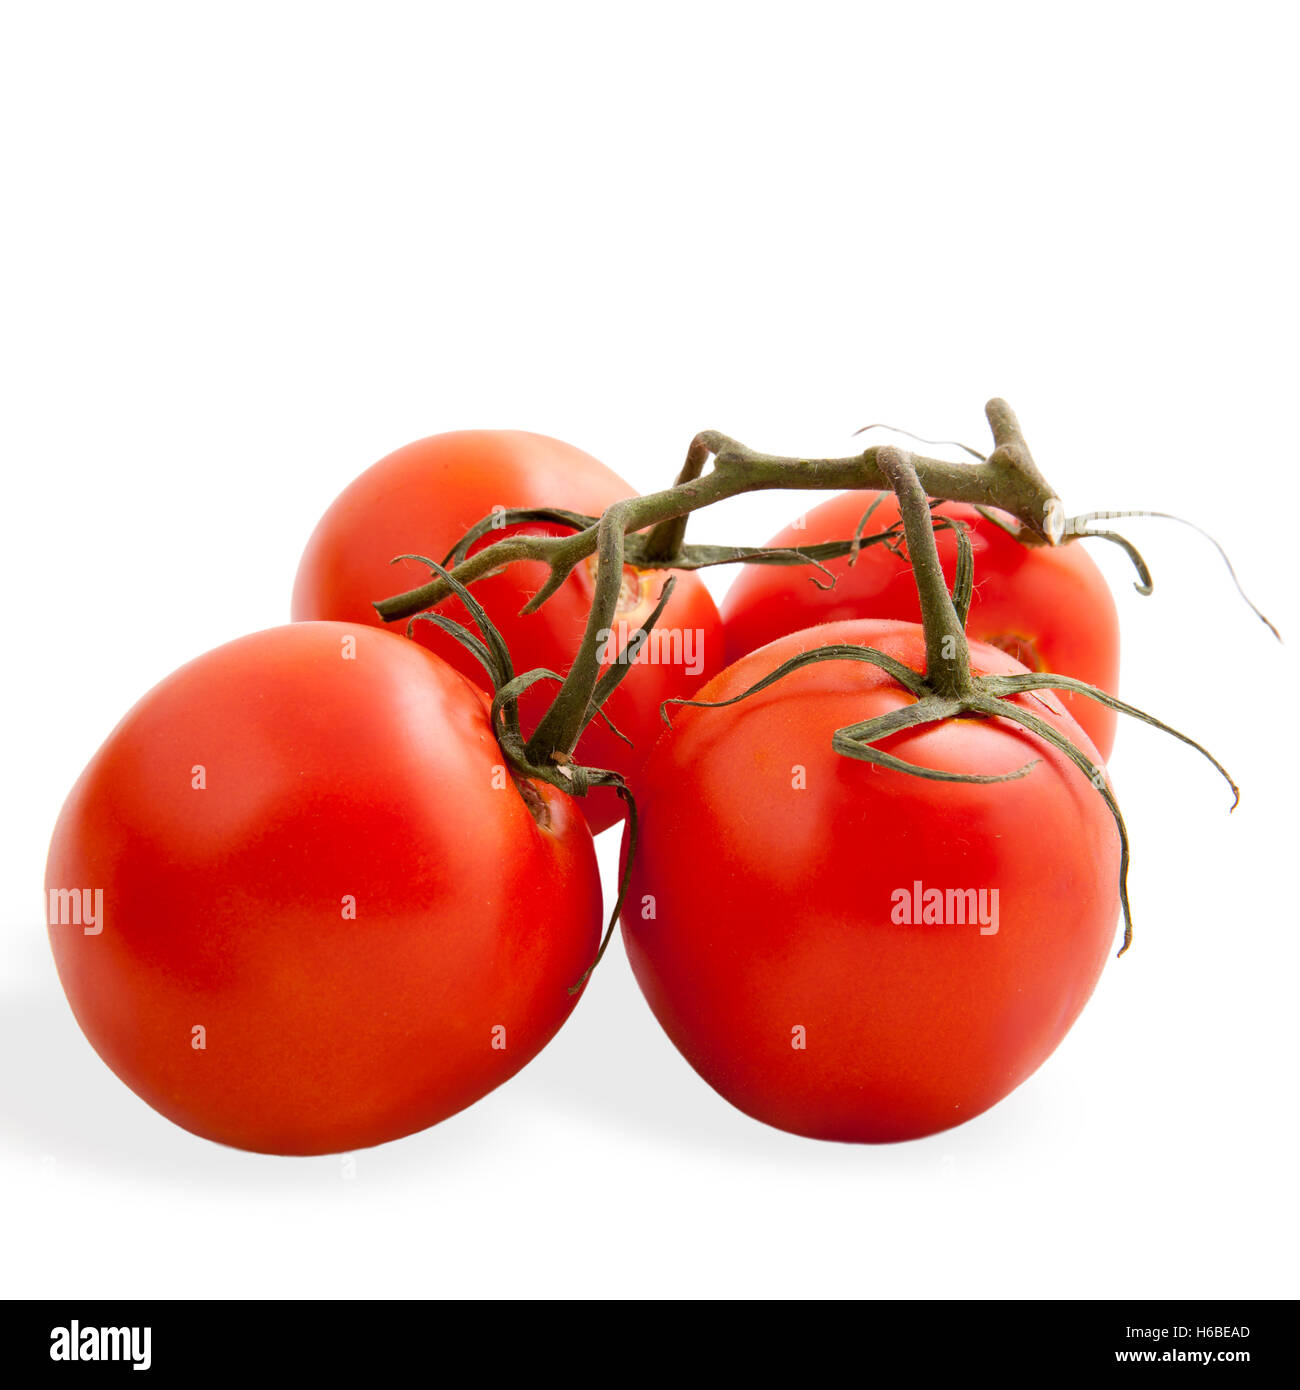 Tomatoes on the white background Stock Photo